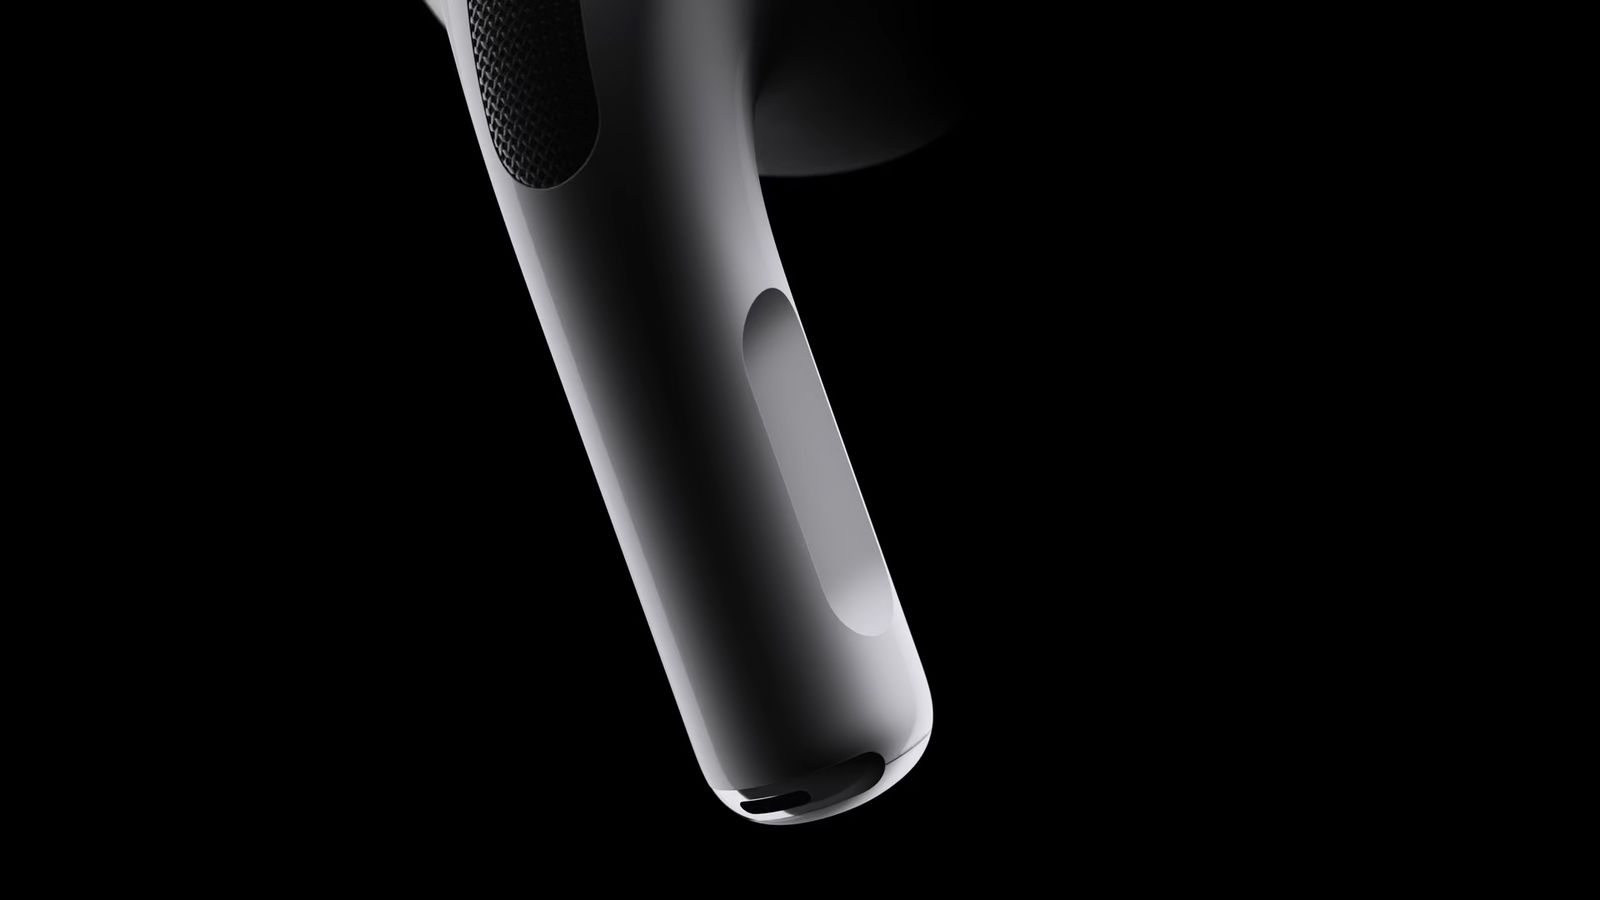 From iPhoneIslam.com, a close-up of modern and elegant black AirPods on a dark background, highlighting their sleek design and texture.